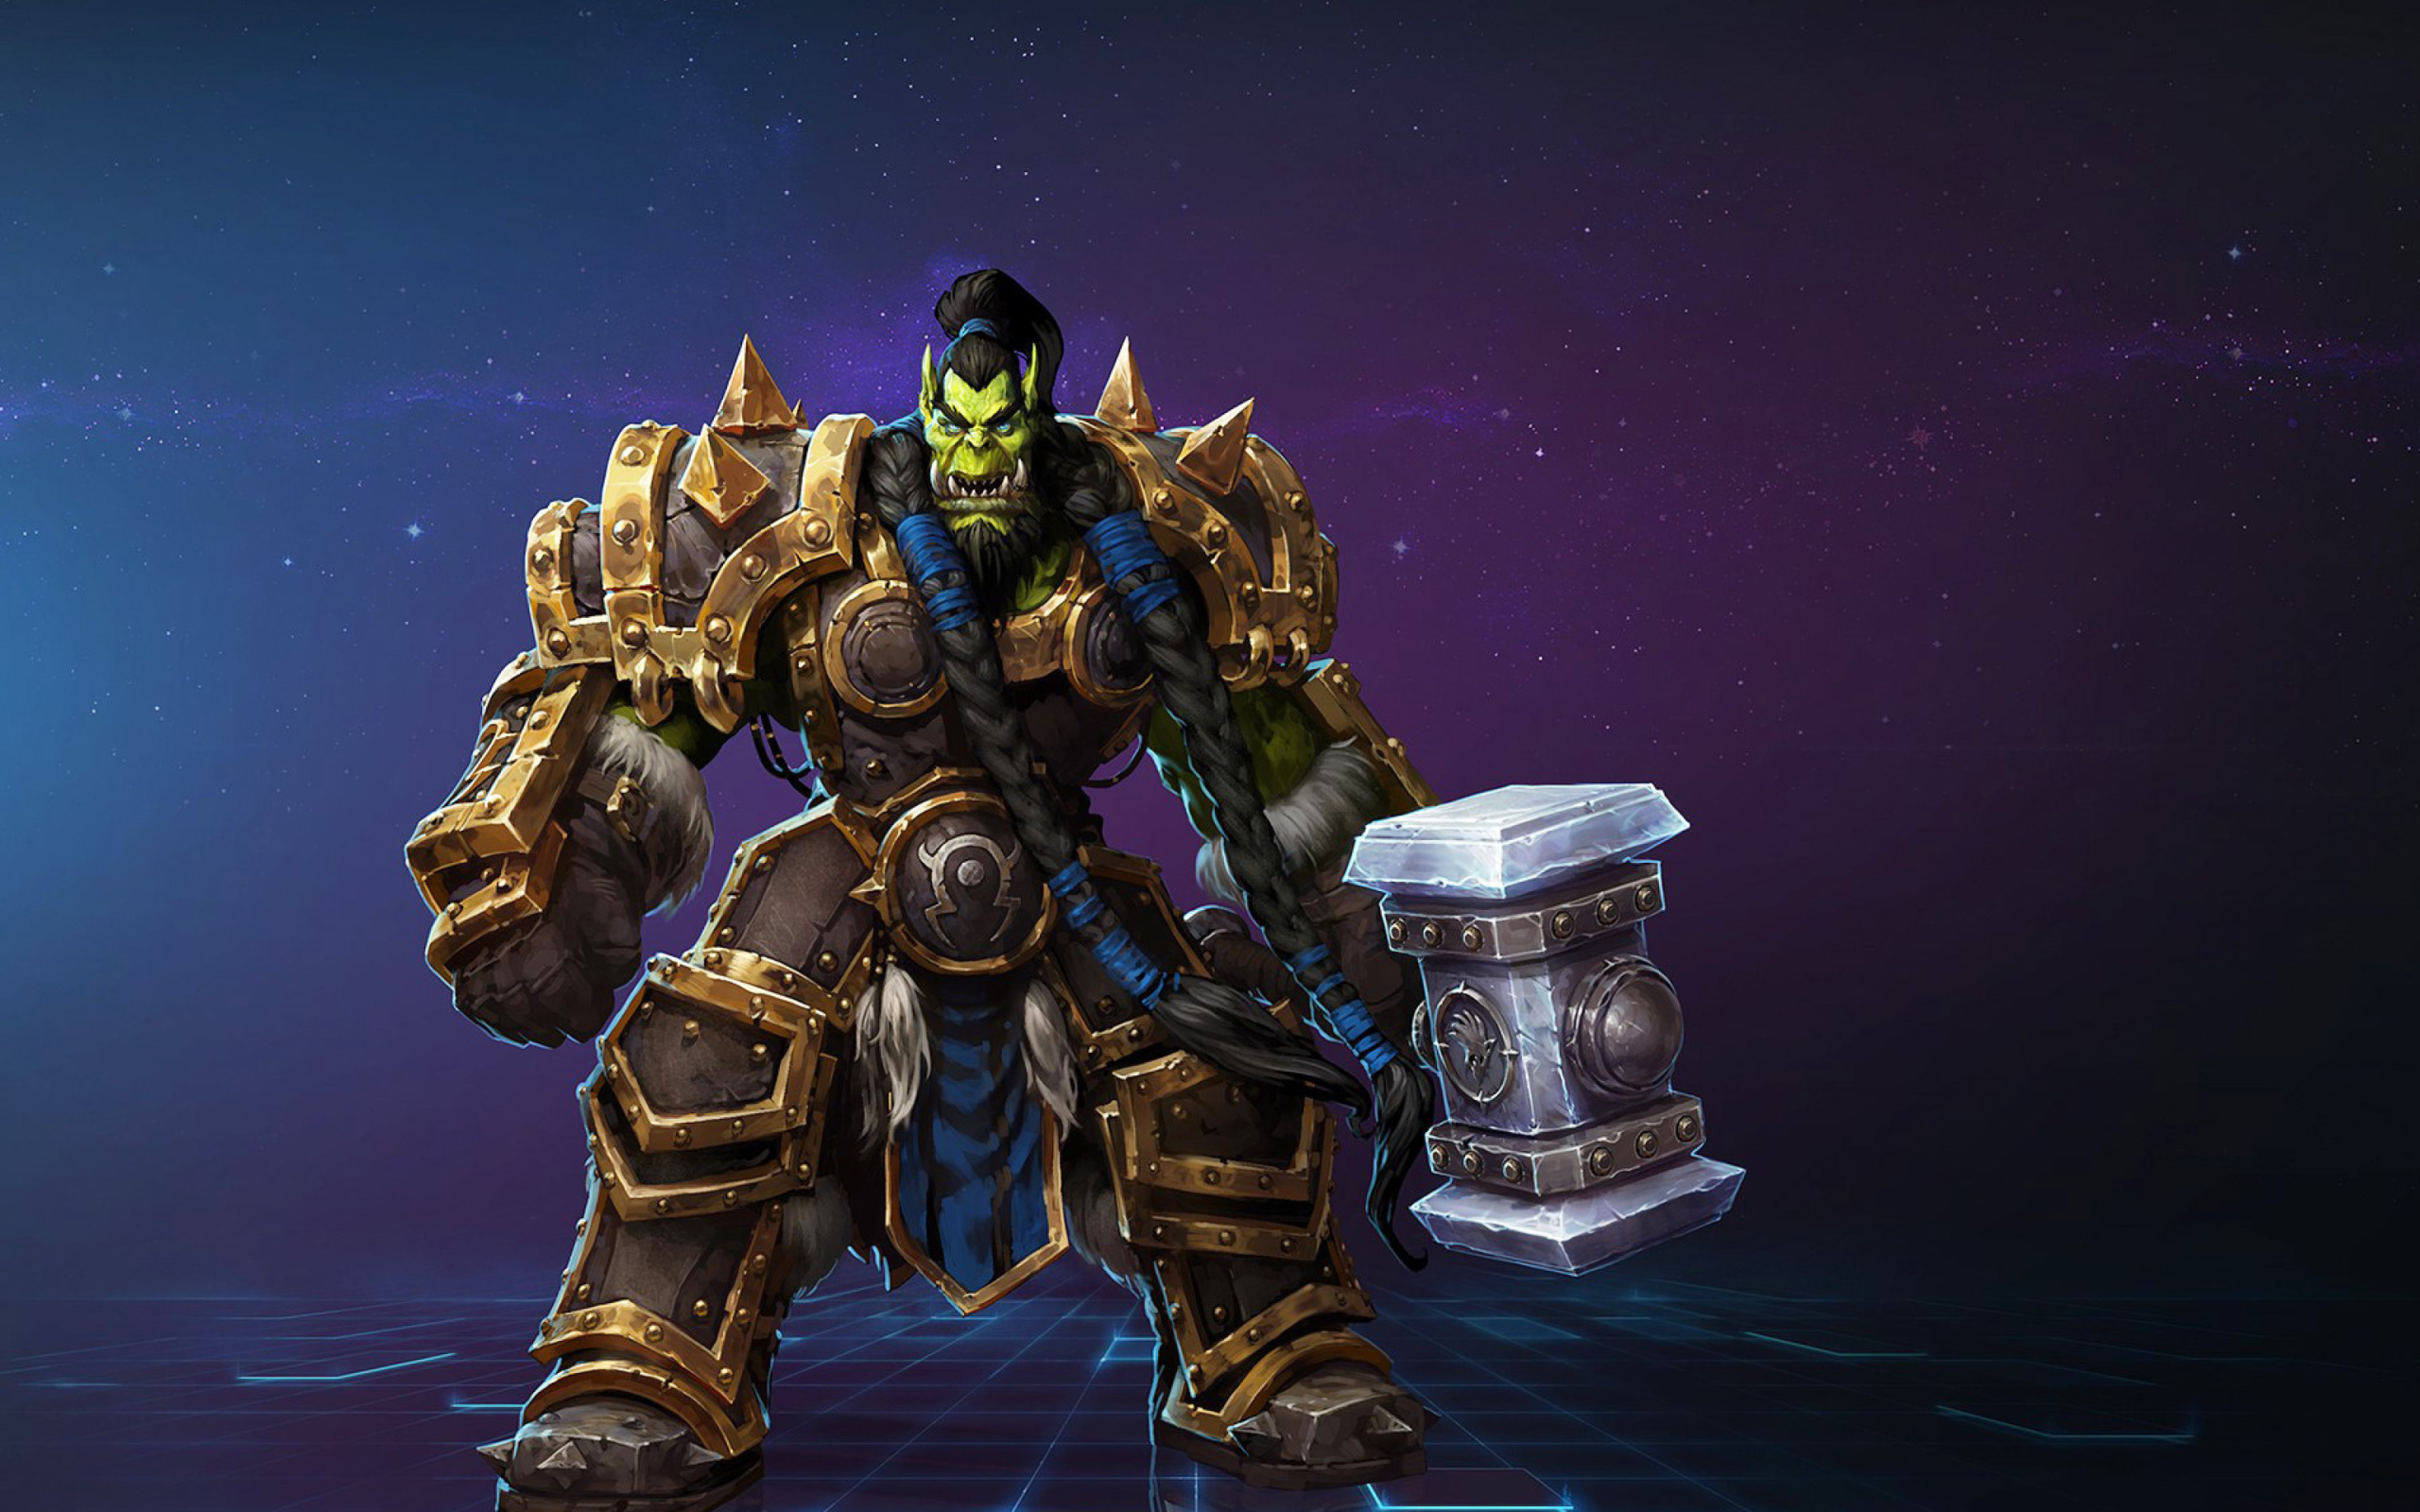 Heroes of the Storm multiplayer online battle arena video game screenshot #1 2560x1600